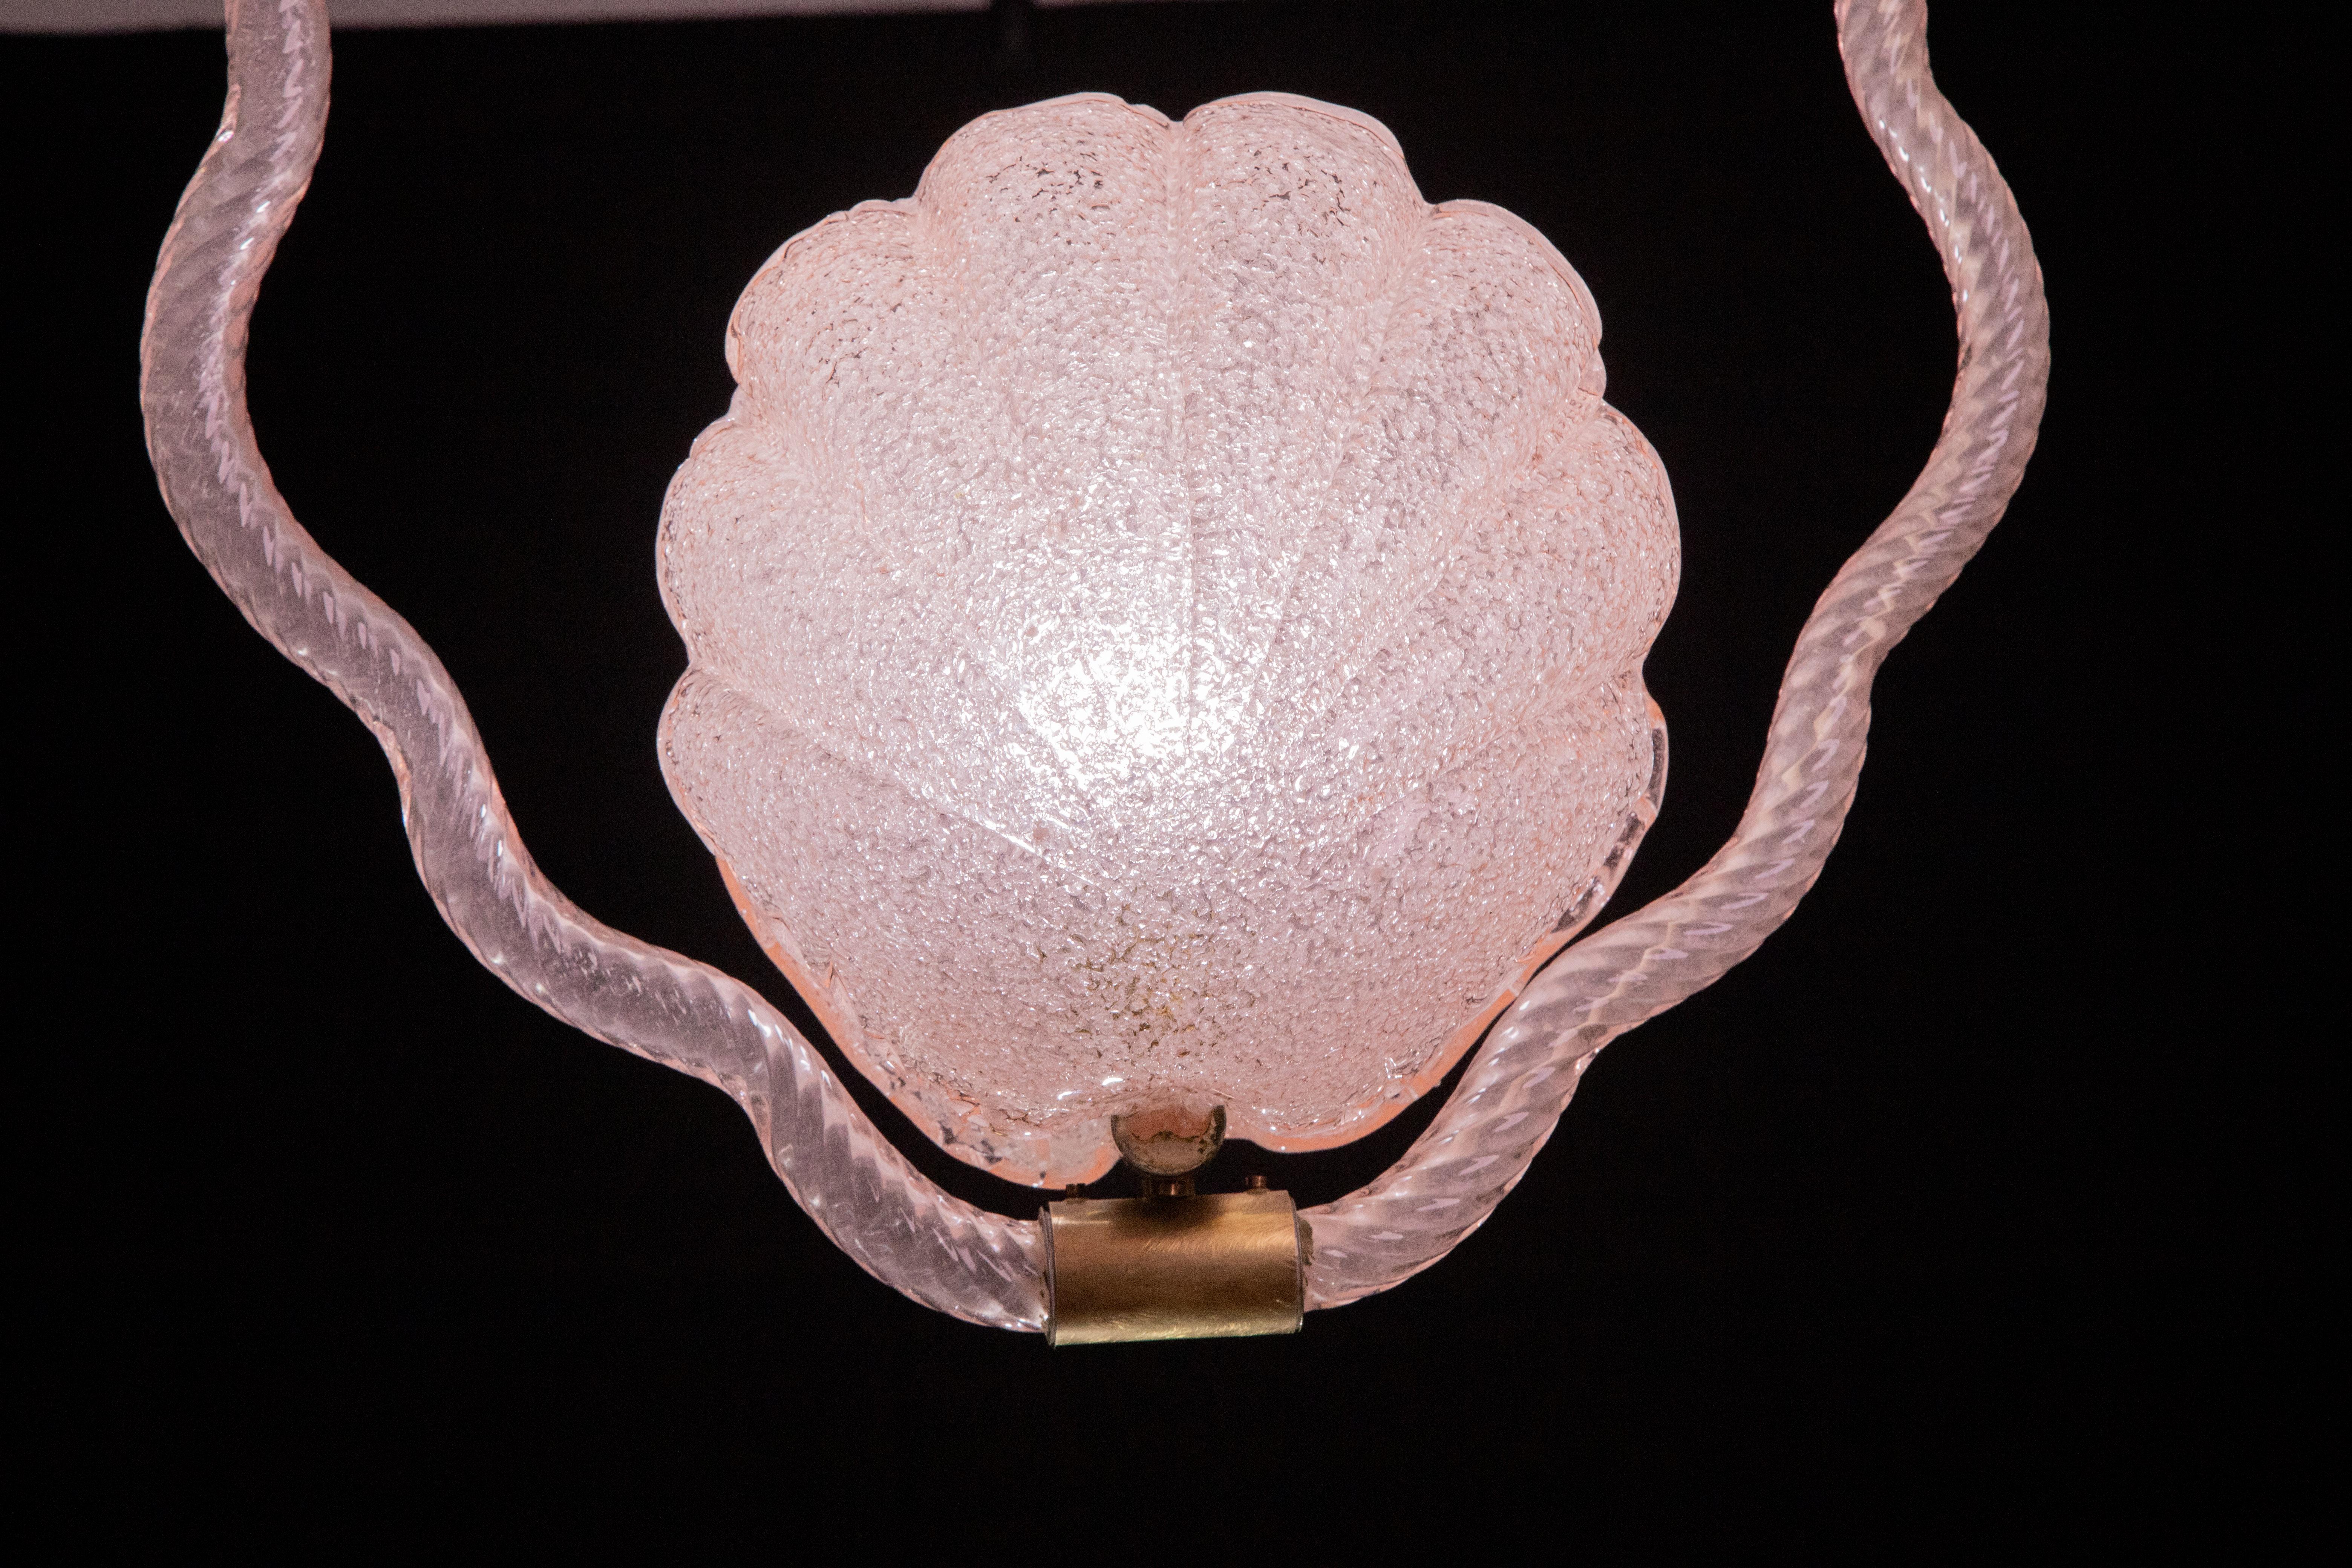 Unique pair of Murano chandeliers, Barovier and Toso glassworks, one pink and one transparent shell-shaped.

1940s-50s.

The chandeliers are very similar but not identical.

Pink:

Stunning Murano chandelier by artist Barovier and Toso with rare